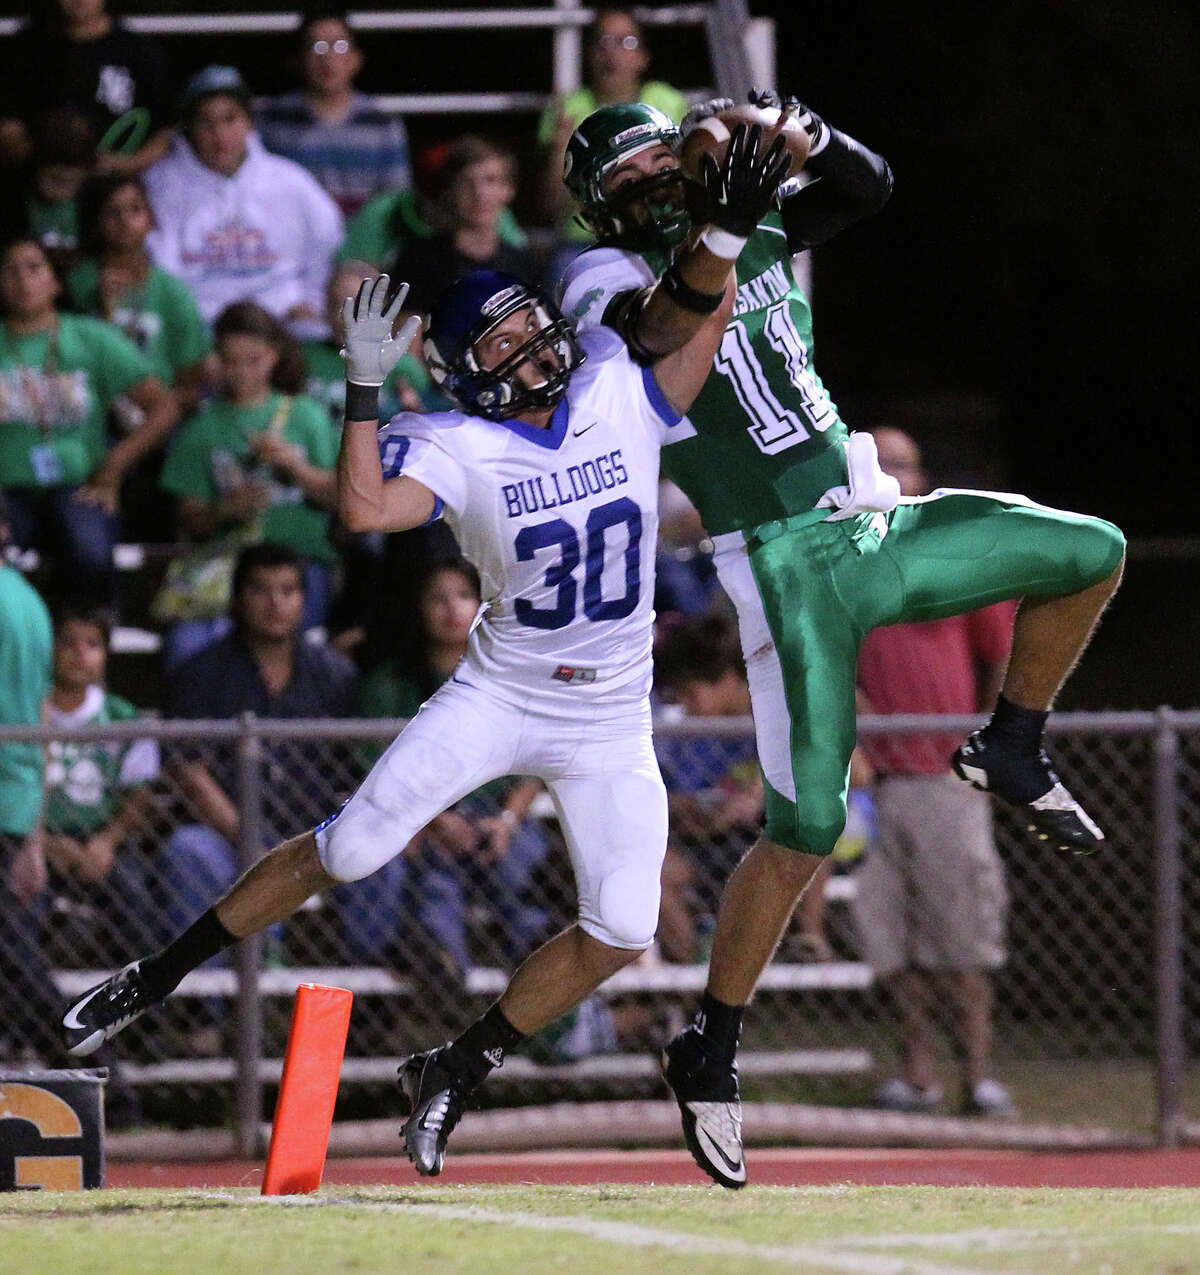 Pleasanton's Jacob Jandt (11) grabs a pass for a touchdown against Somerset's Hunter Dorman (30) in the first half in high school football in Pleasanton on Friday, Nov. 2, 2012.